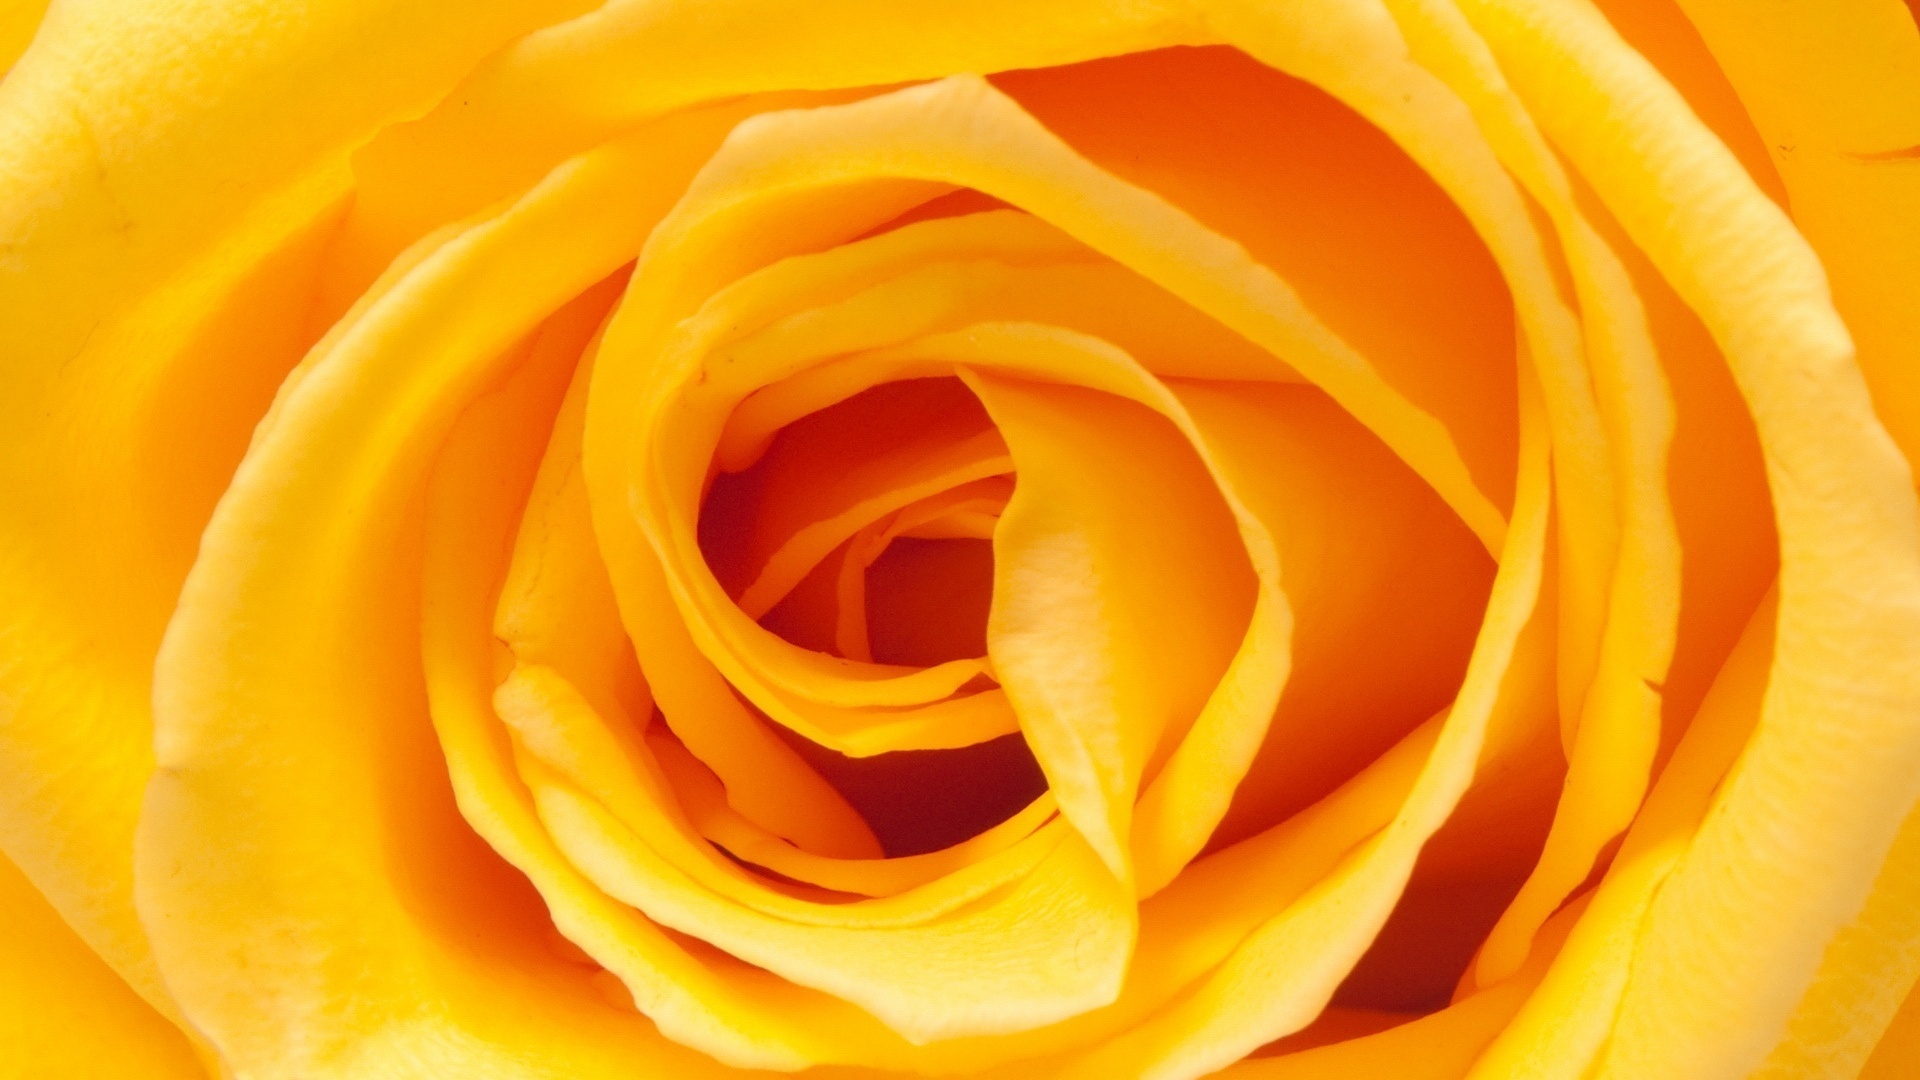 Yellow Rose Wallpaper High Definition Quality Widescreen